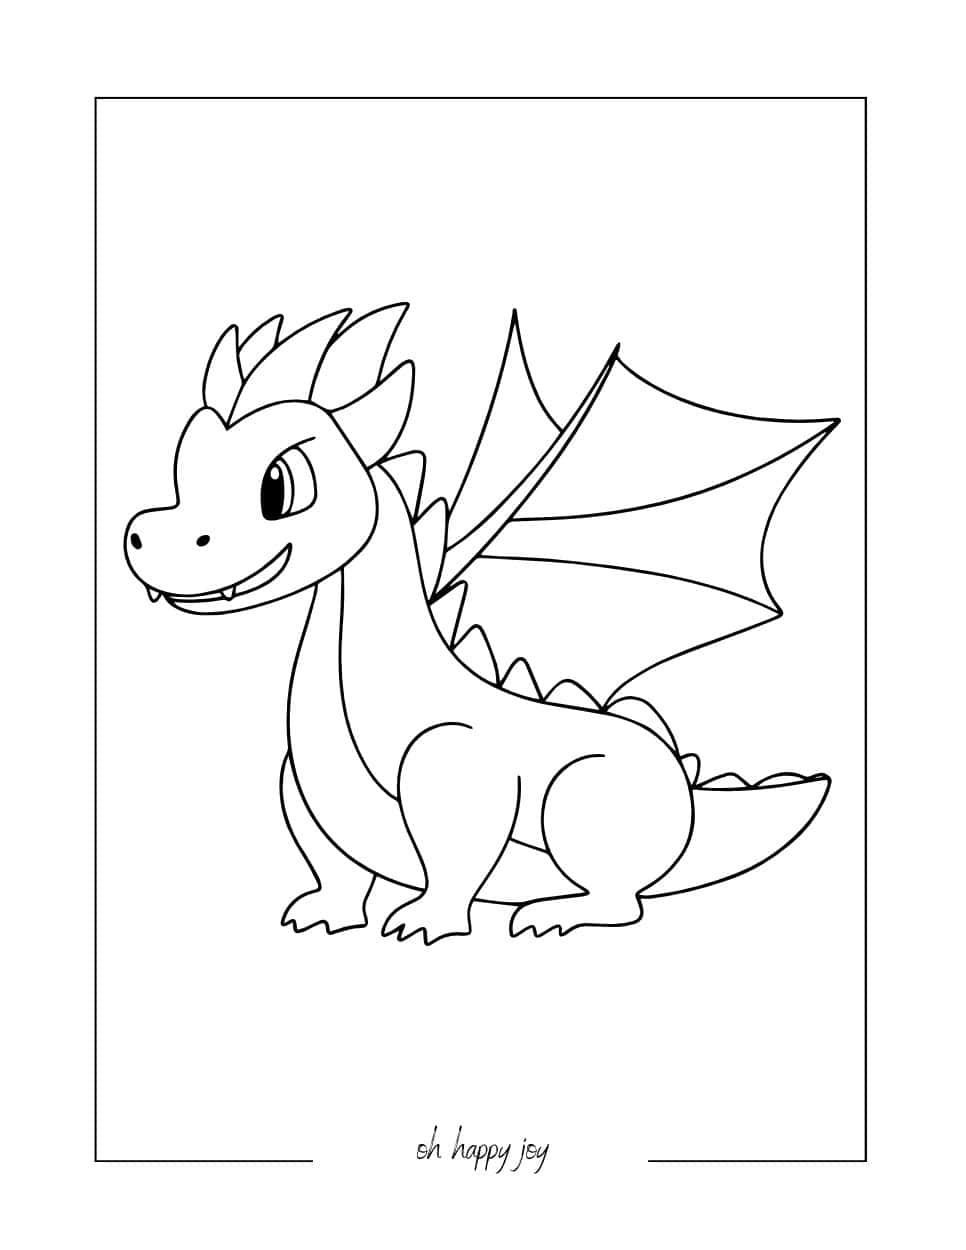 Dragon with Fangs Coloring Page